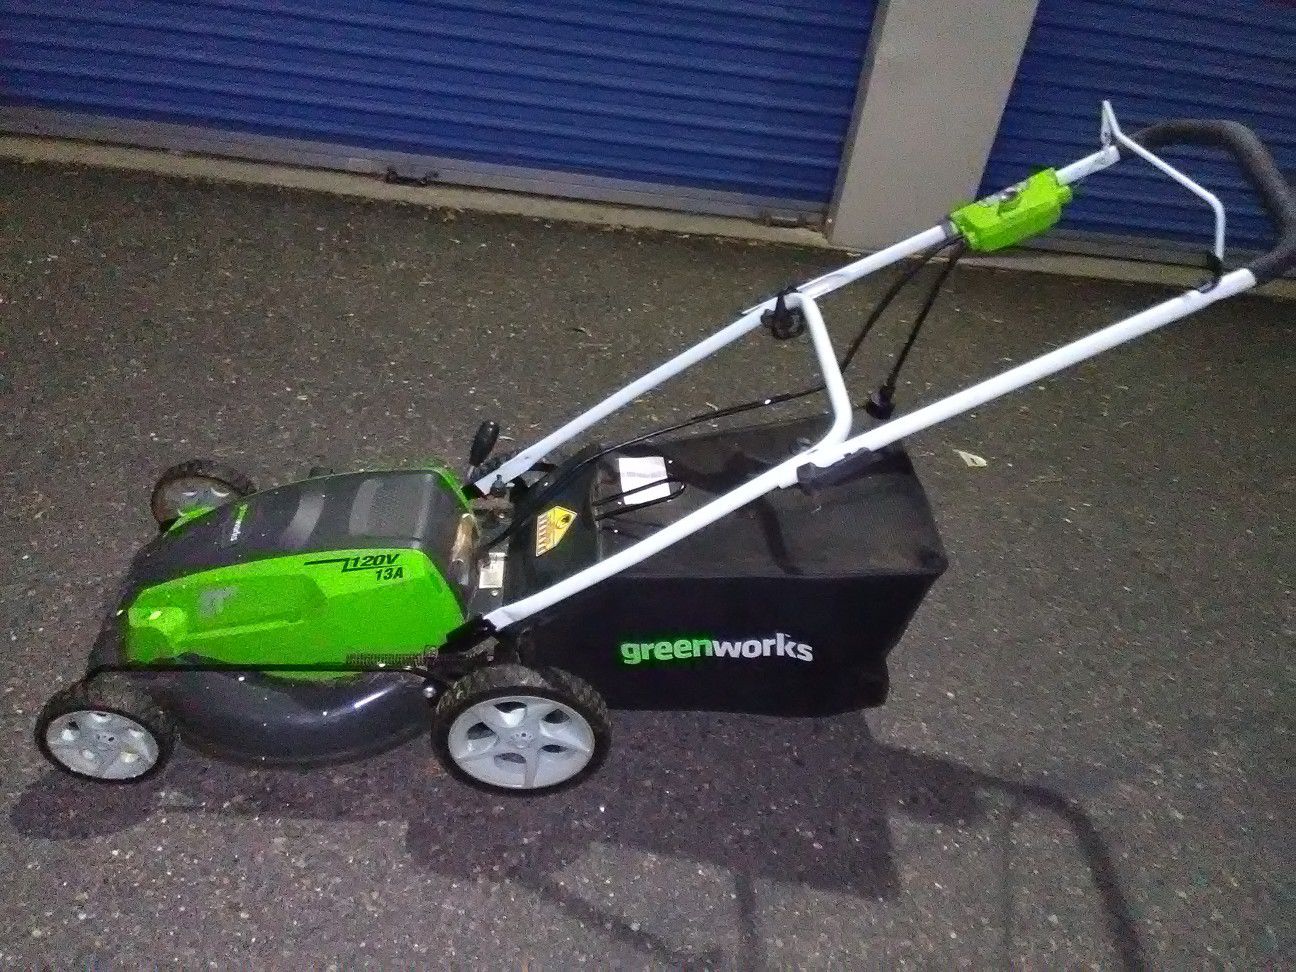 Lightweight electric lawn mower three-in-one excellent new condition reliable and ready for immediate use pick up or curbside or delivery aval.